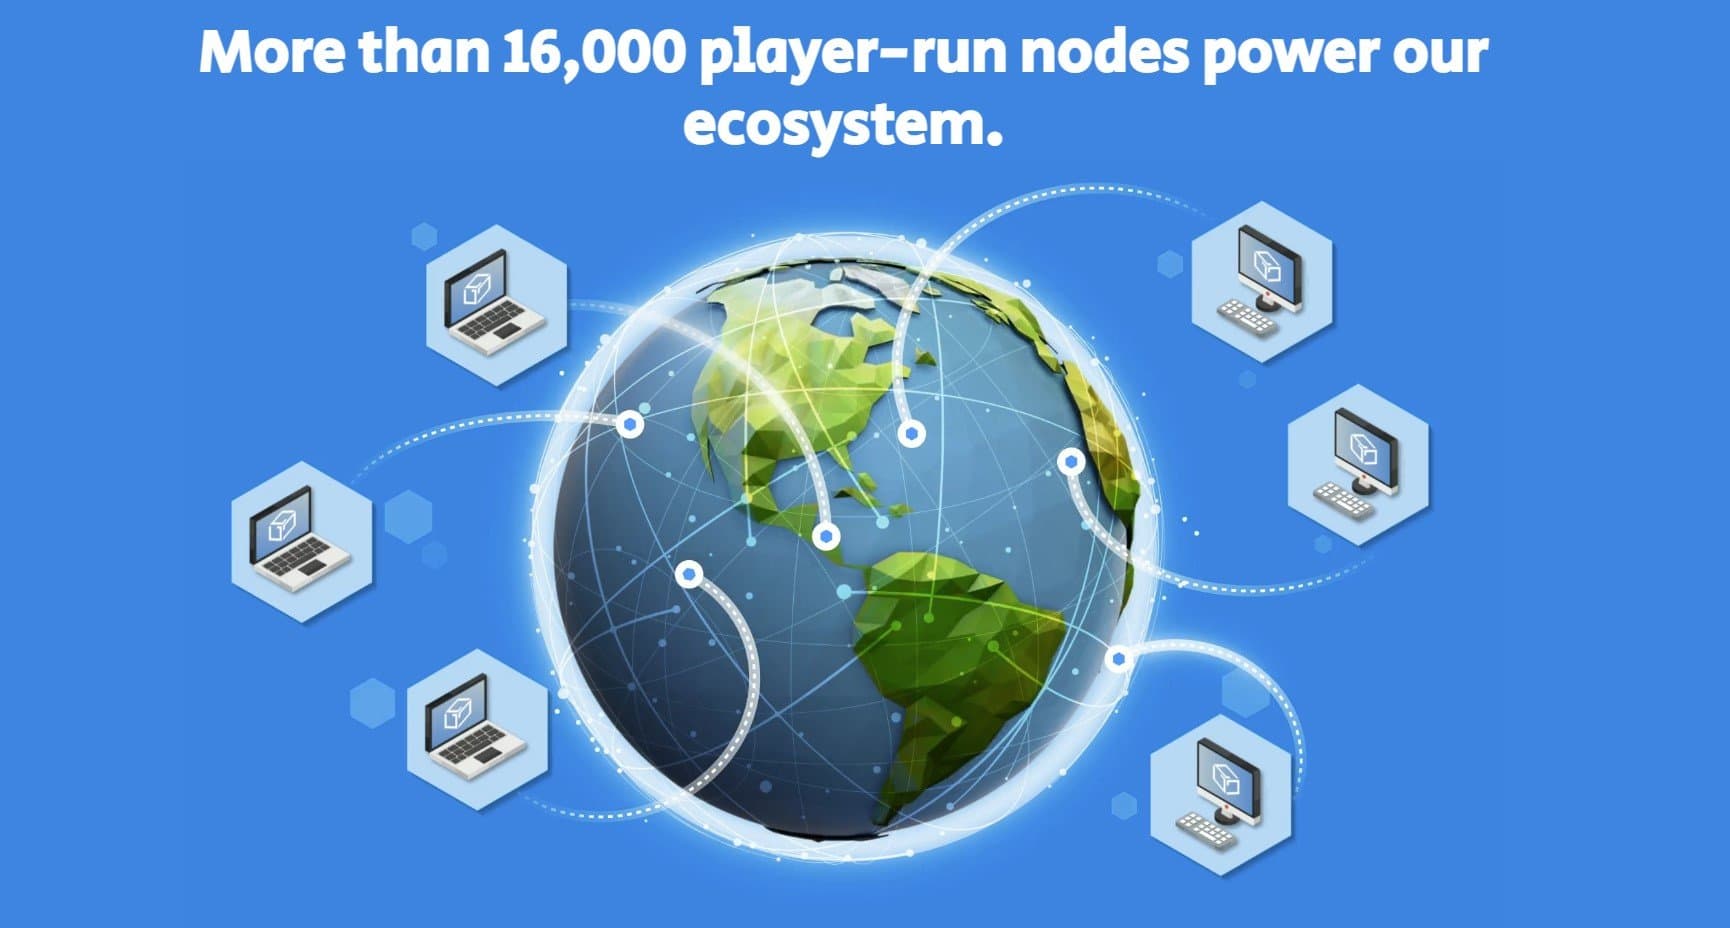 Screengrab from Gala website visualizing the system of nodes that runs the network and provides passive income for players via GALA